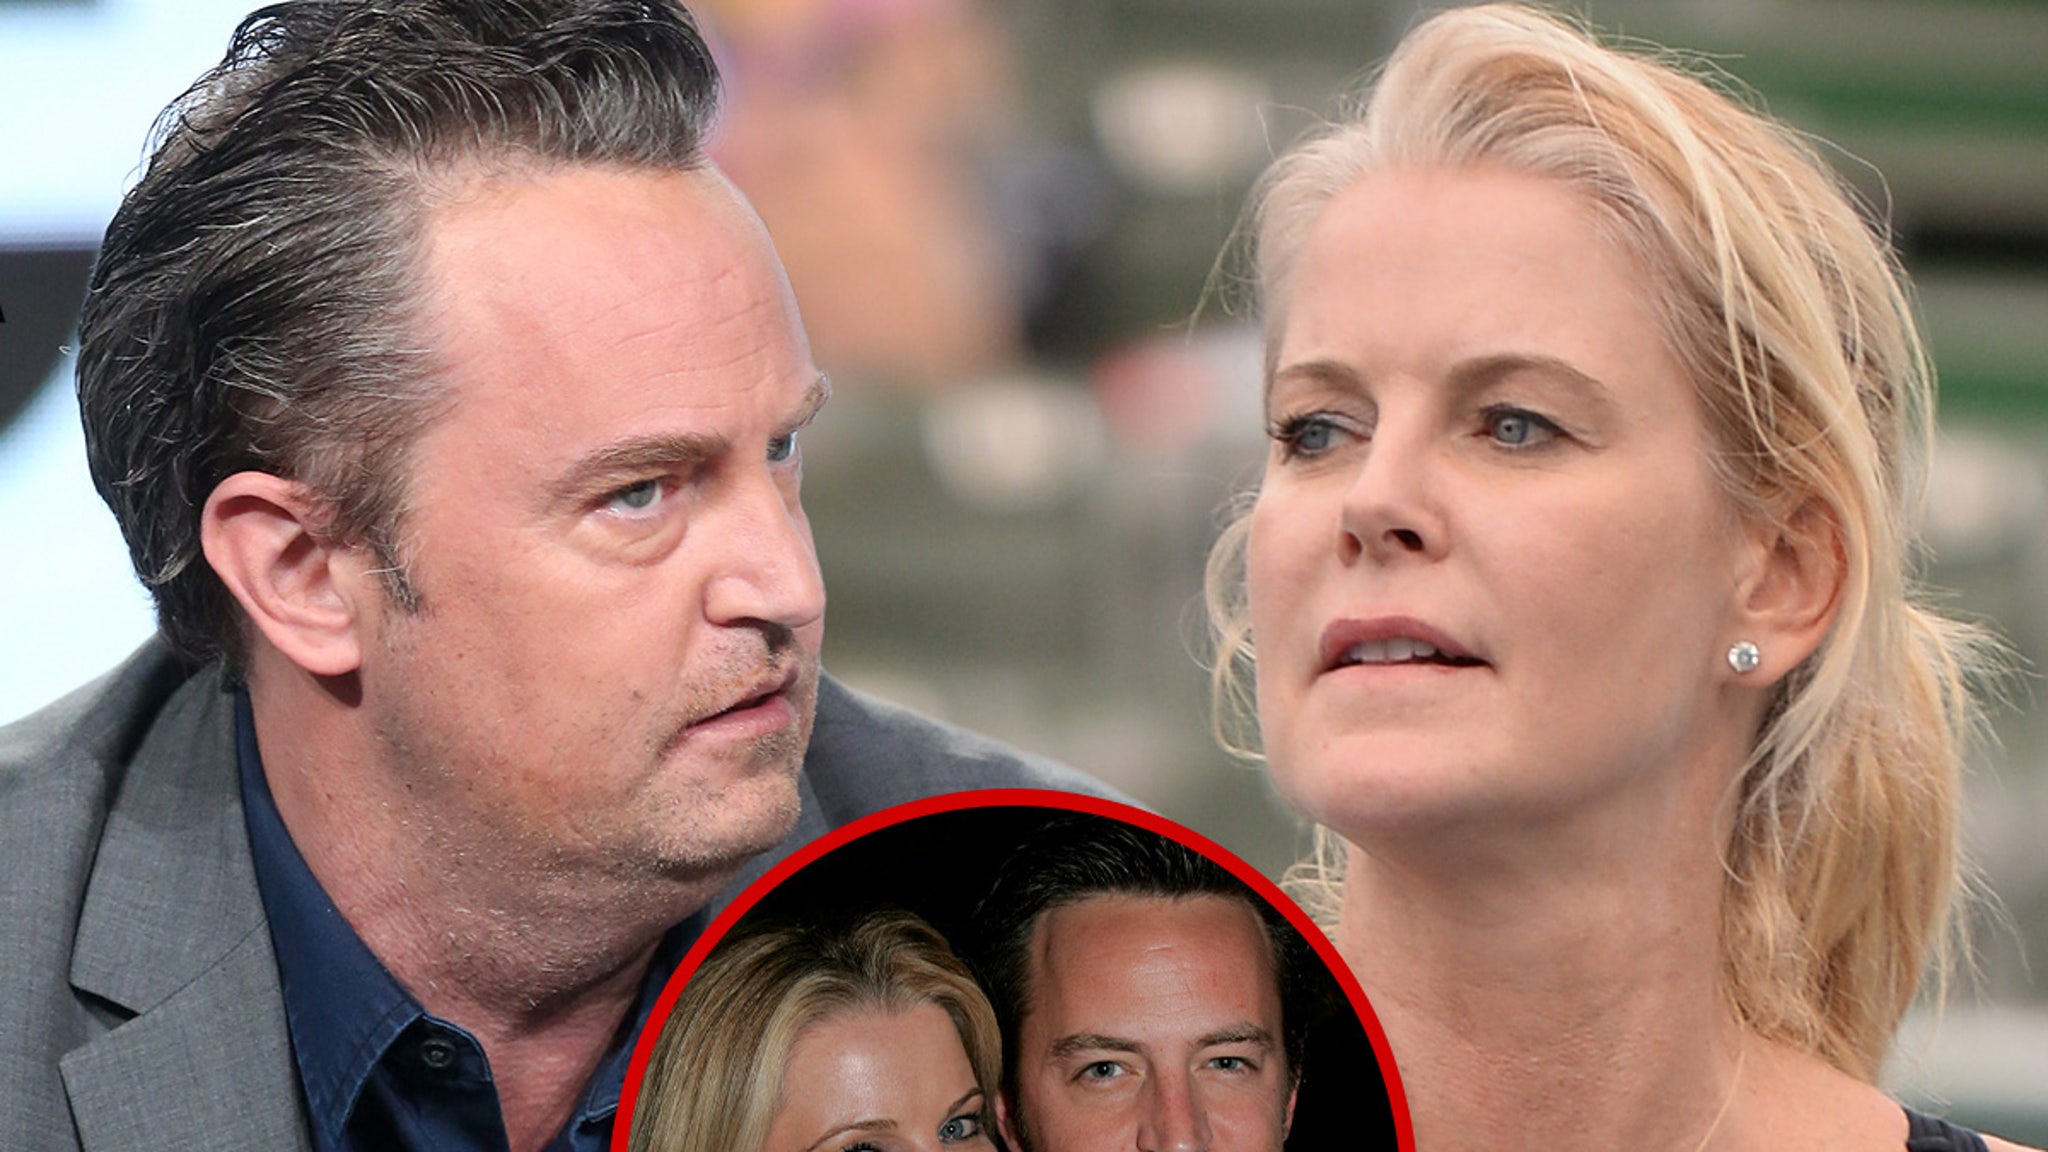 Matthew Perry’s Ex-GF Maeve Quinlan Says His Death 'Wasn’t A Shock’